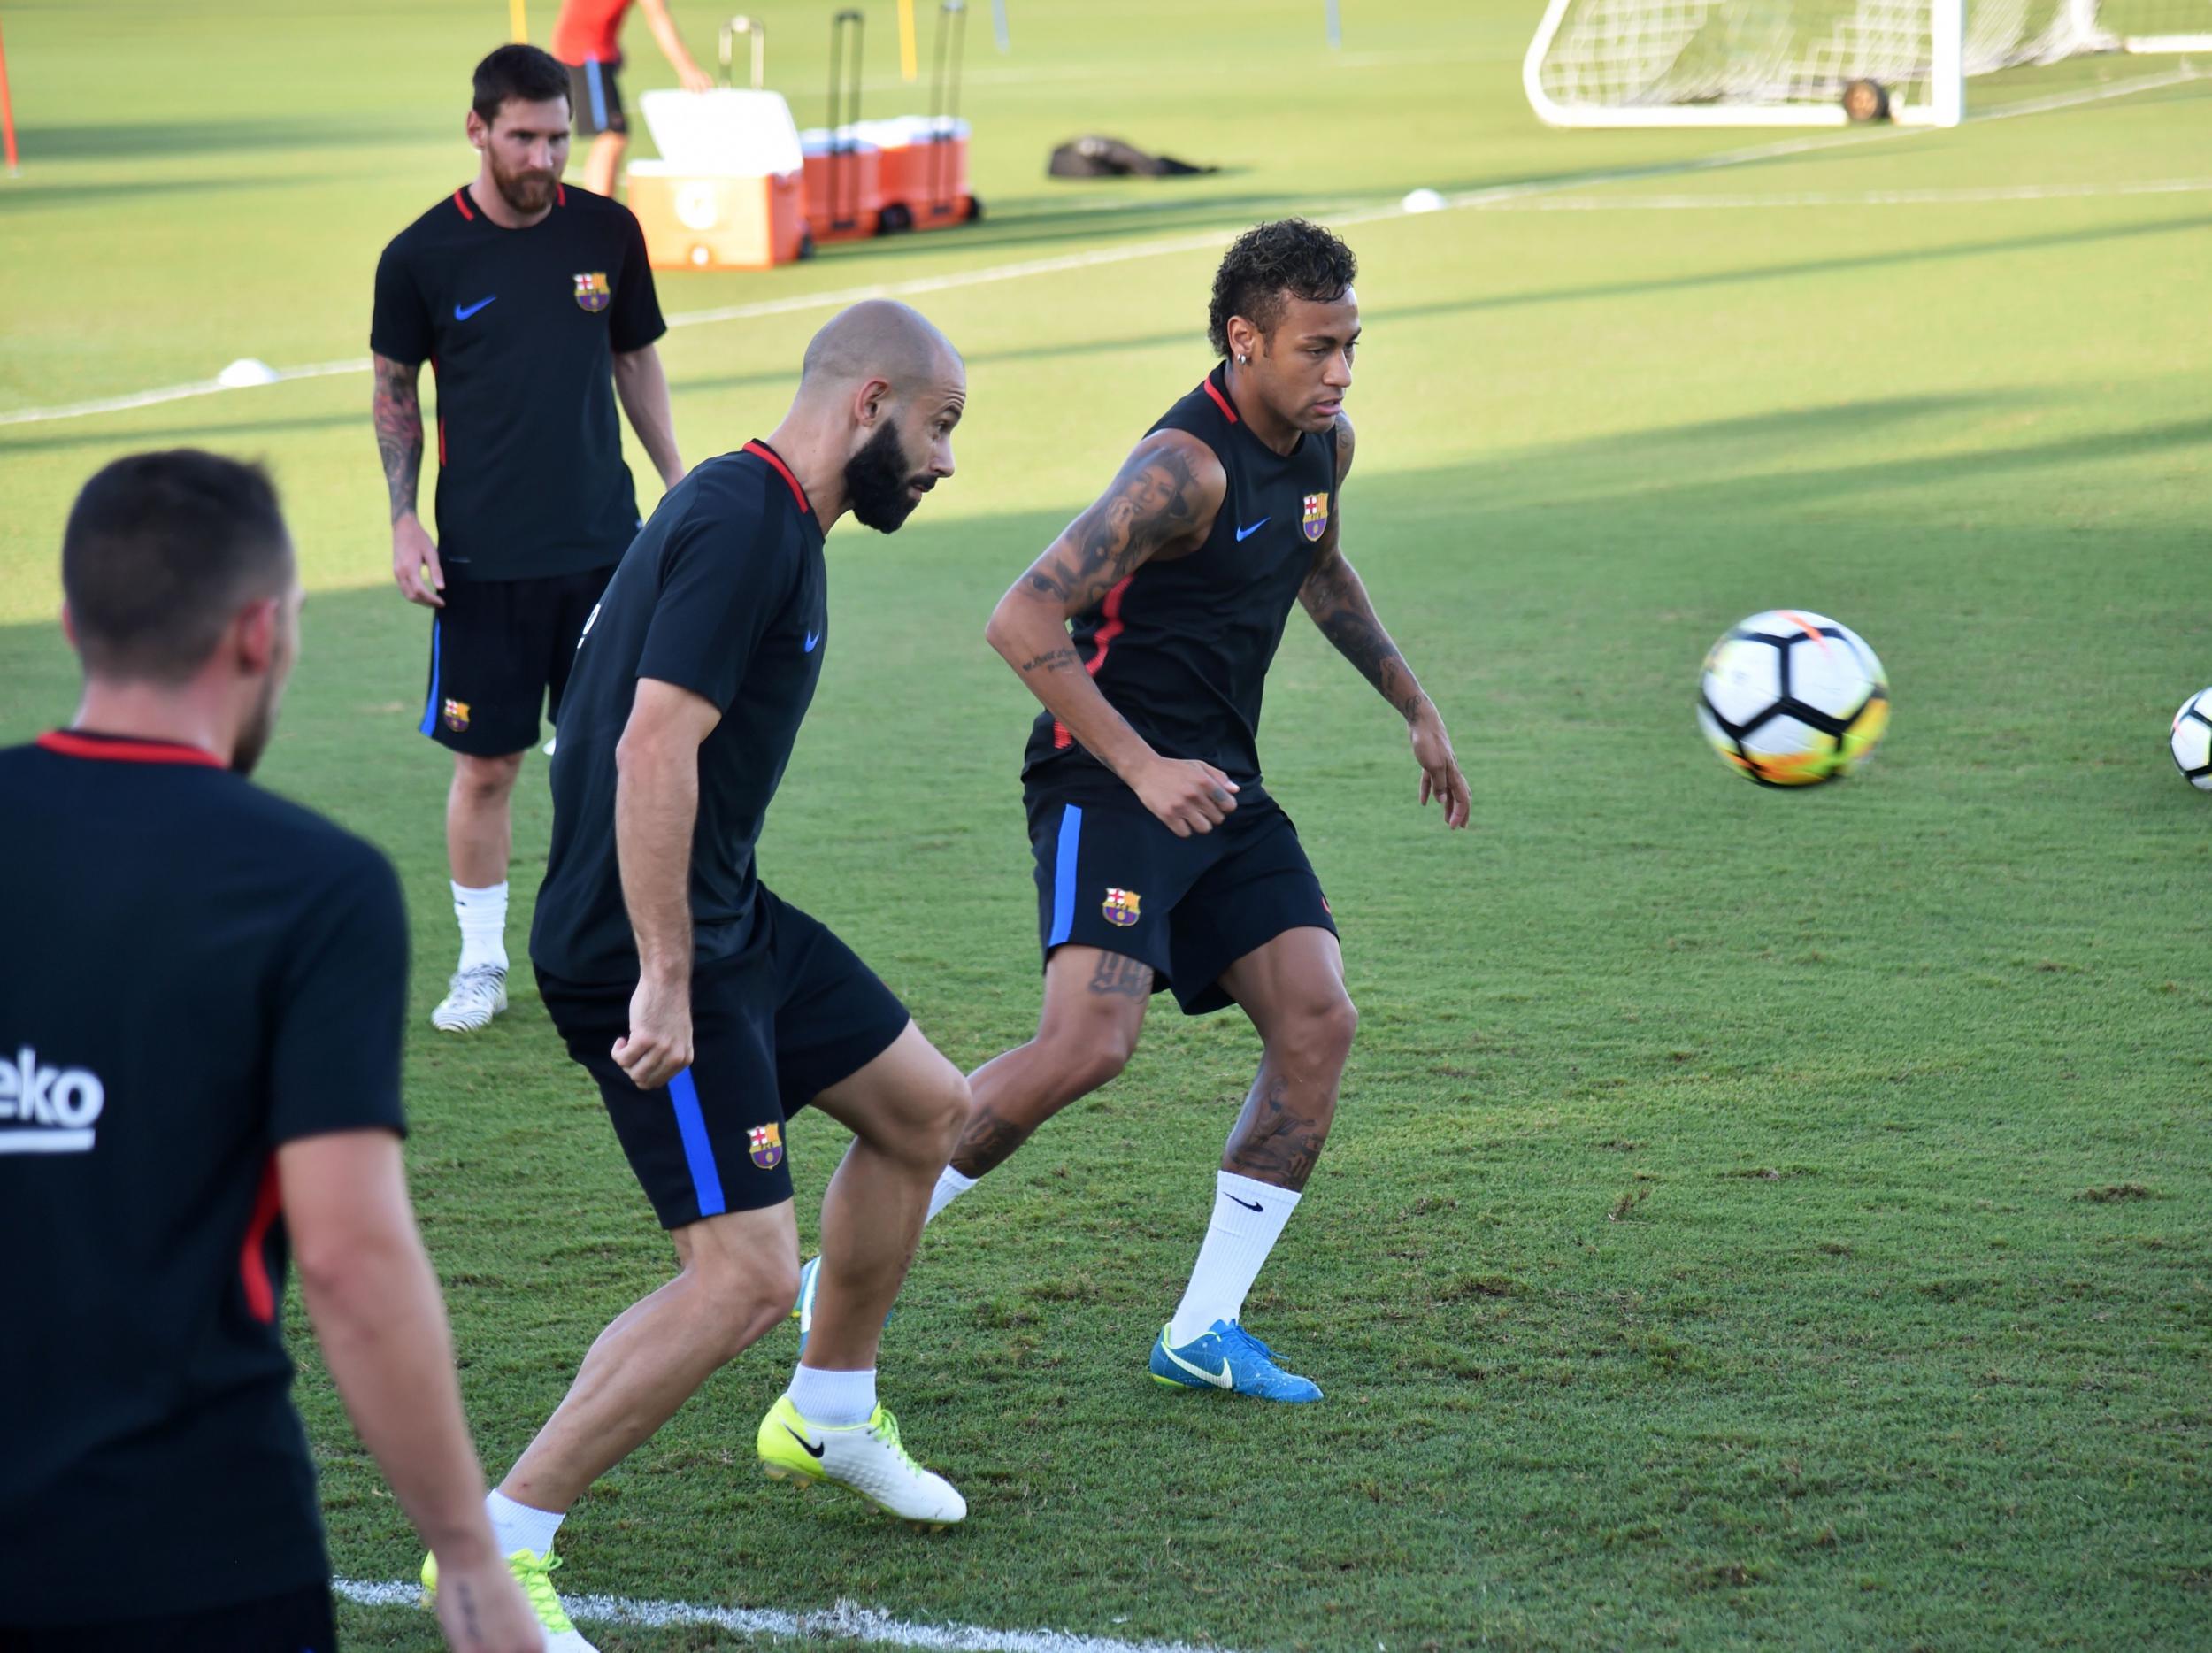 Neymar in training, shortly before the incident with Semedo